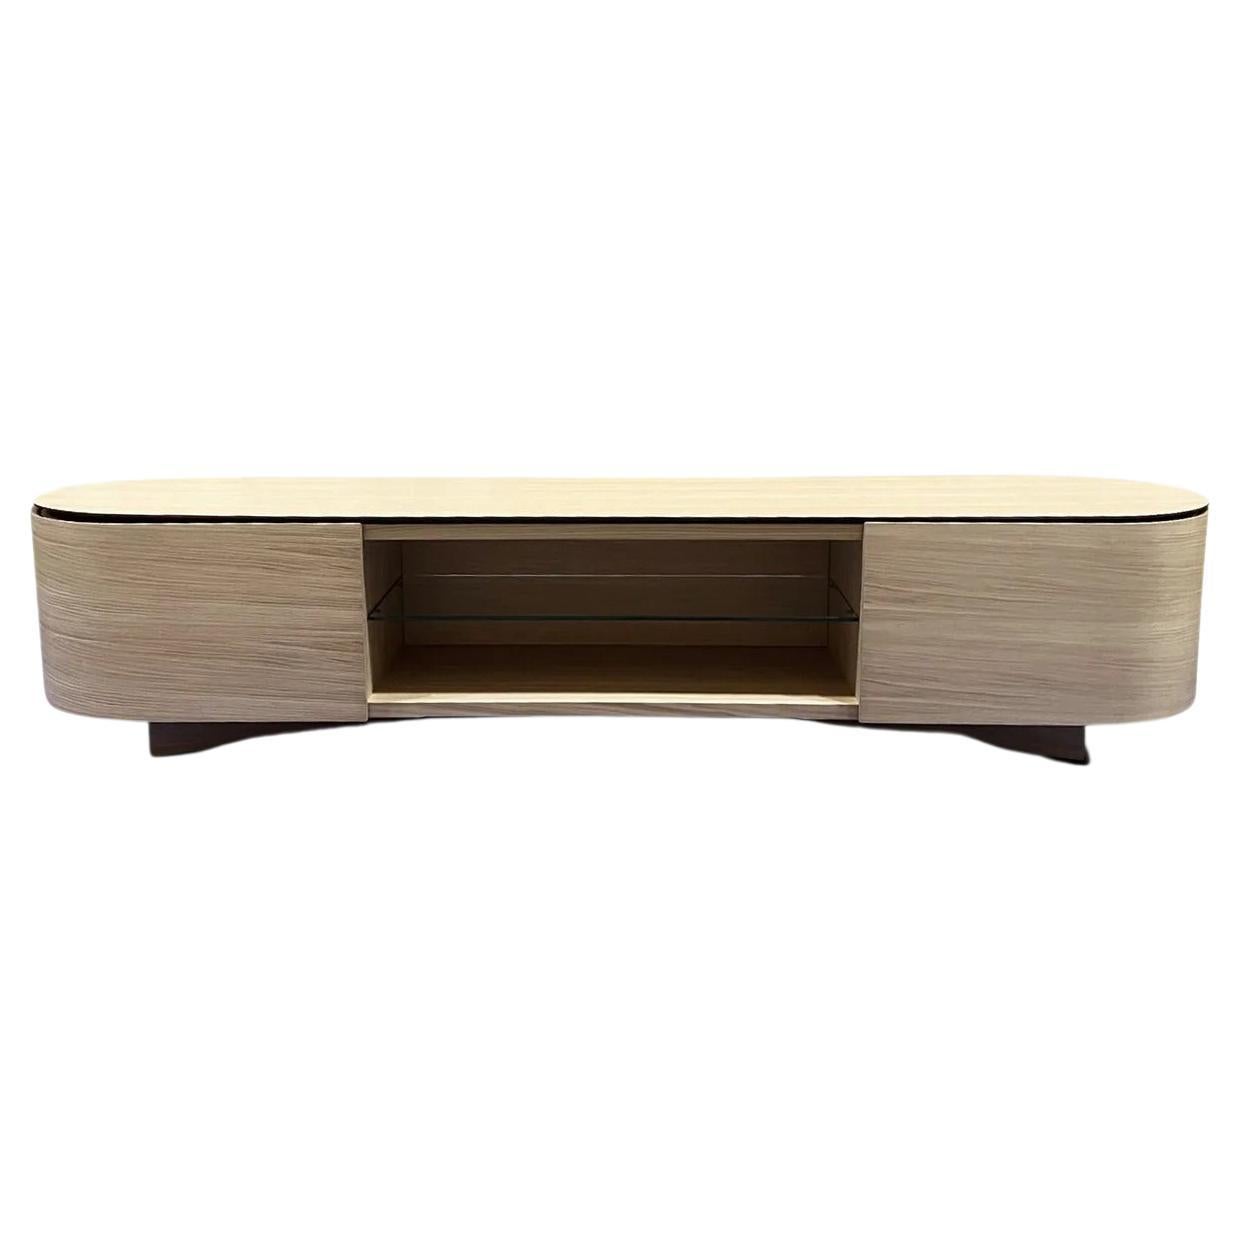 558 Rondos Credenza in Oak- 2 Drawers with Open Compartment For Sale